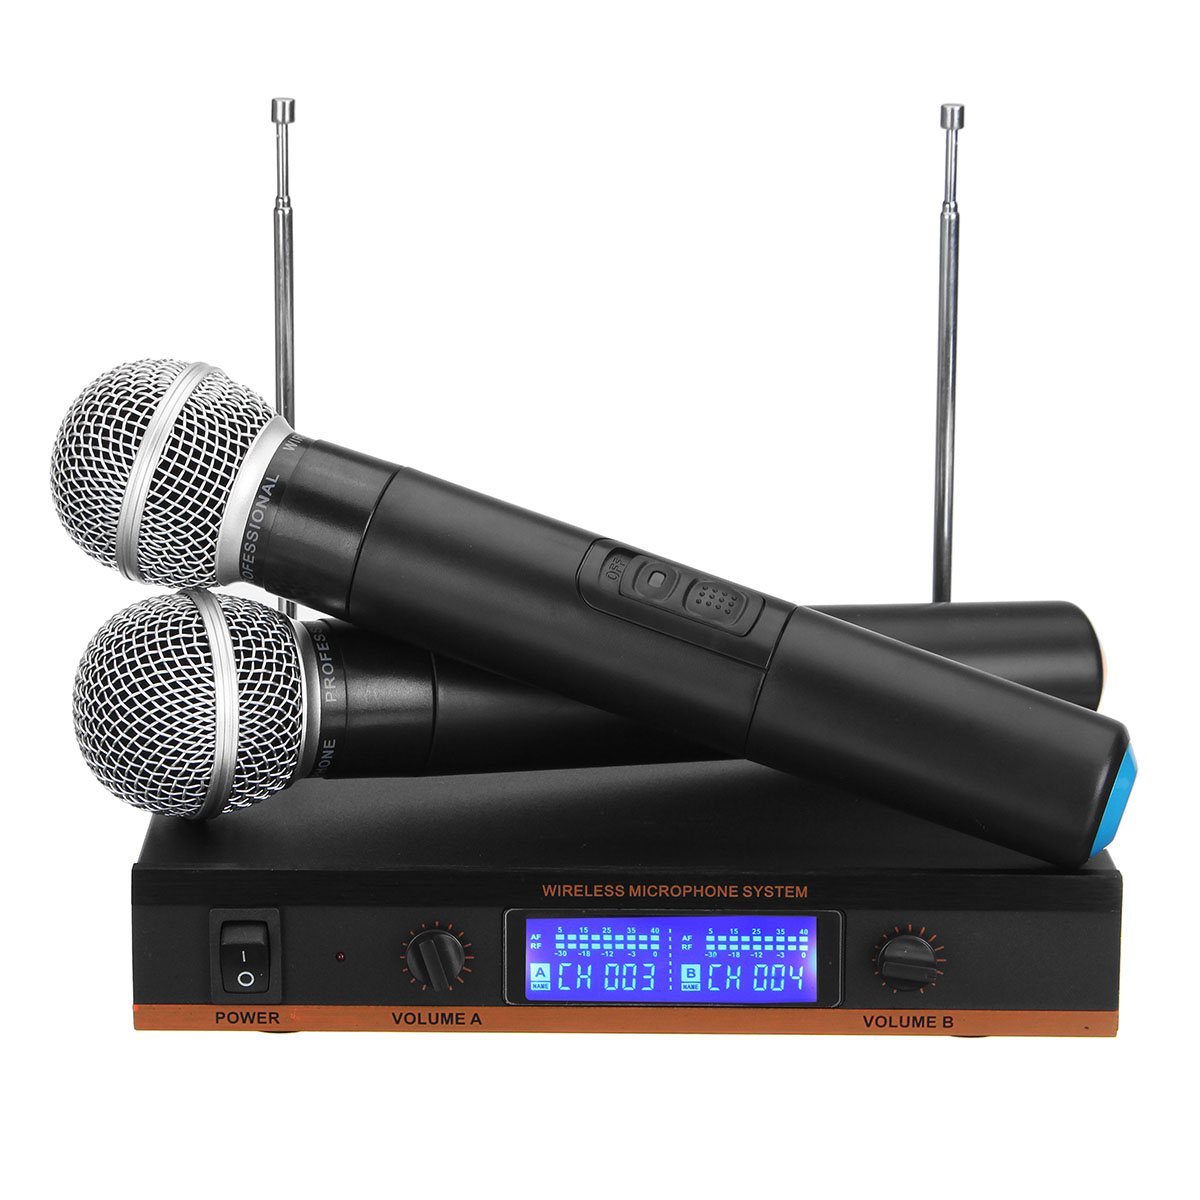 Find UHF Multifunction Wireless Portable Handheld Microphone System for Karaoke KTV Speech Meeting Stage DJ for Sale on Gipsybee.com with cryptocurrencies